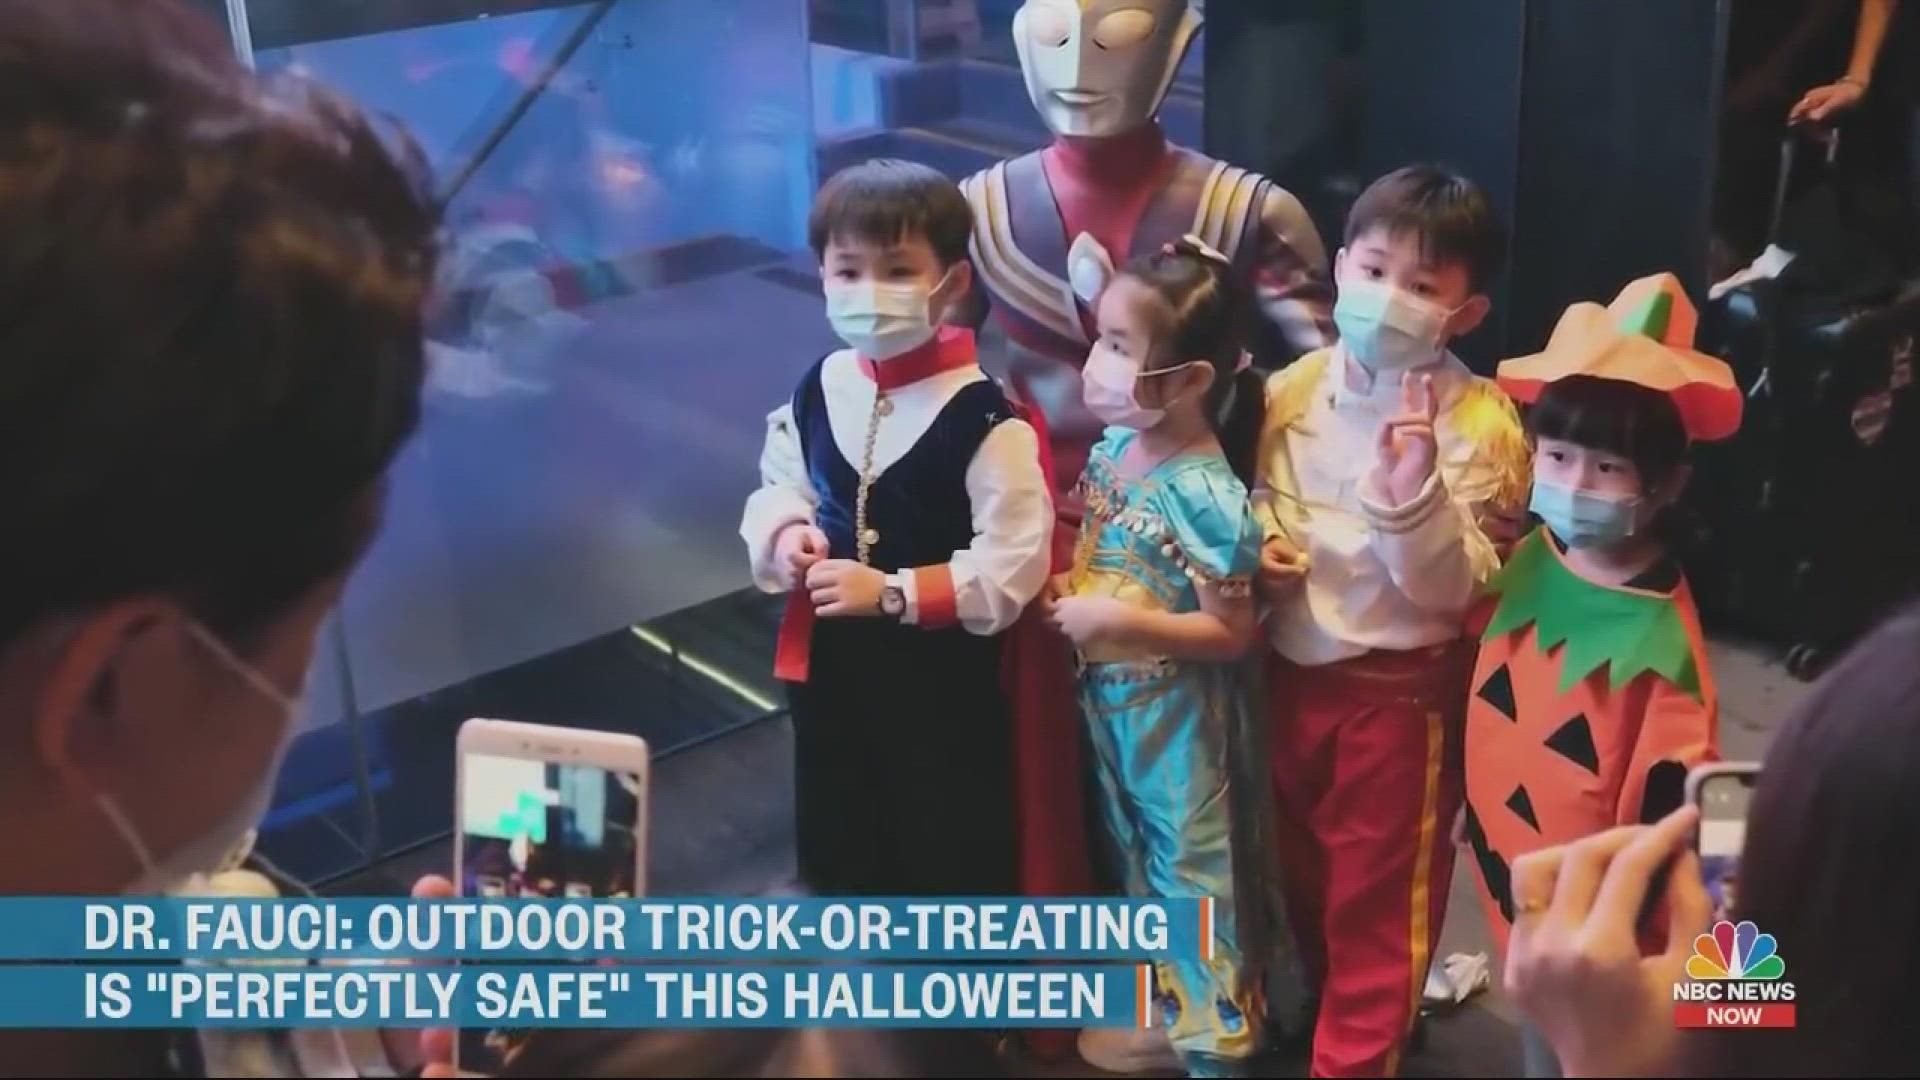 The FDA has not yet approved COVID vaccines for children under 12, so health experts encourage extra safety while enjoying Halloween events.